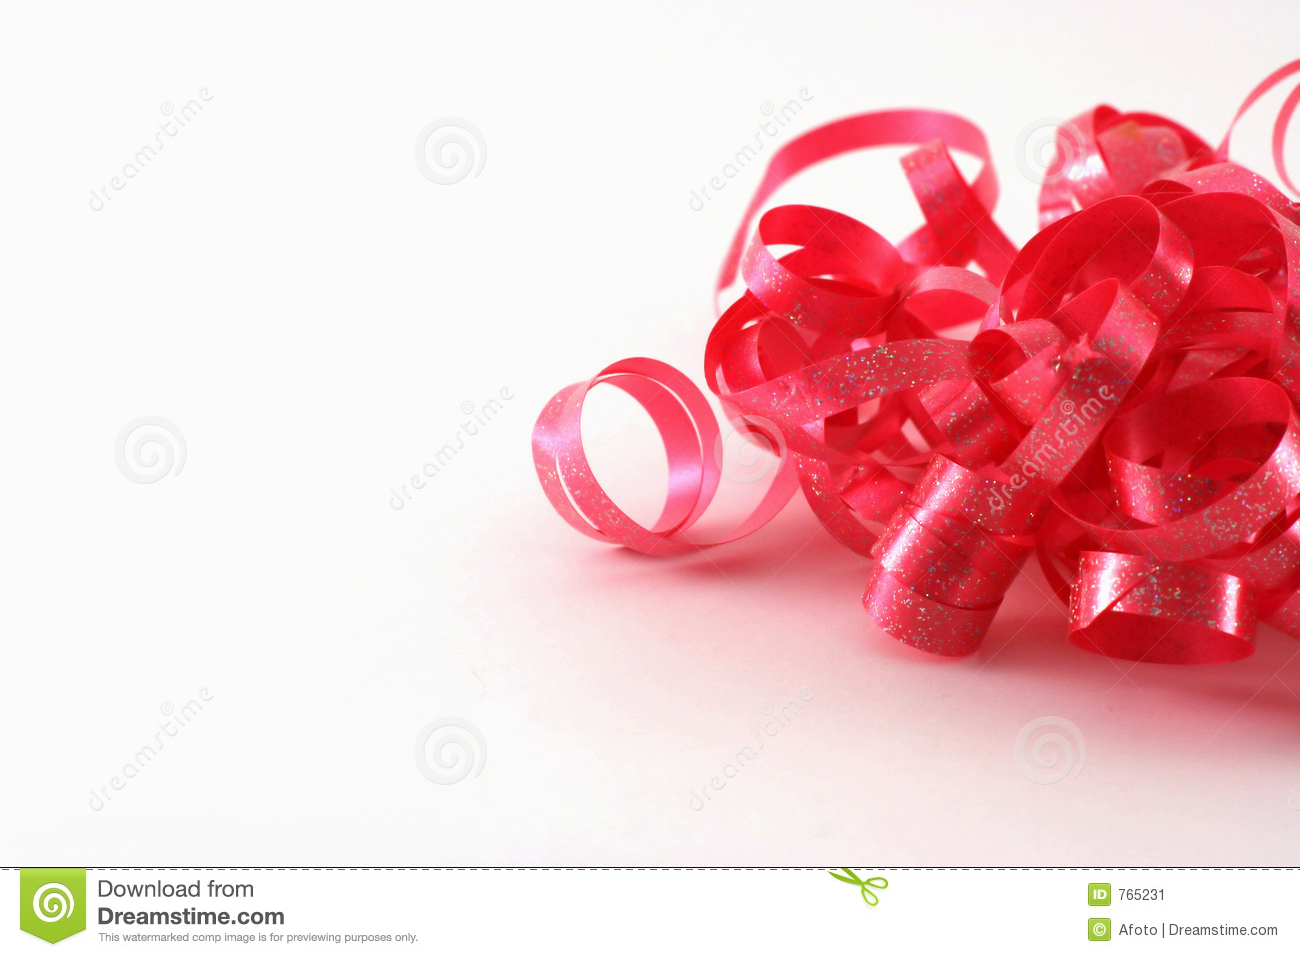 Red Curly Ribbon Stock Image   Image  765231